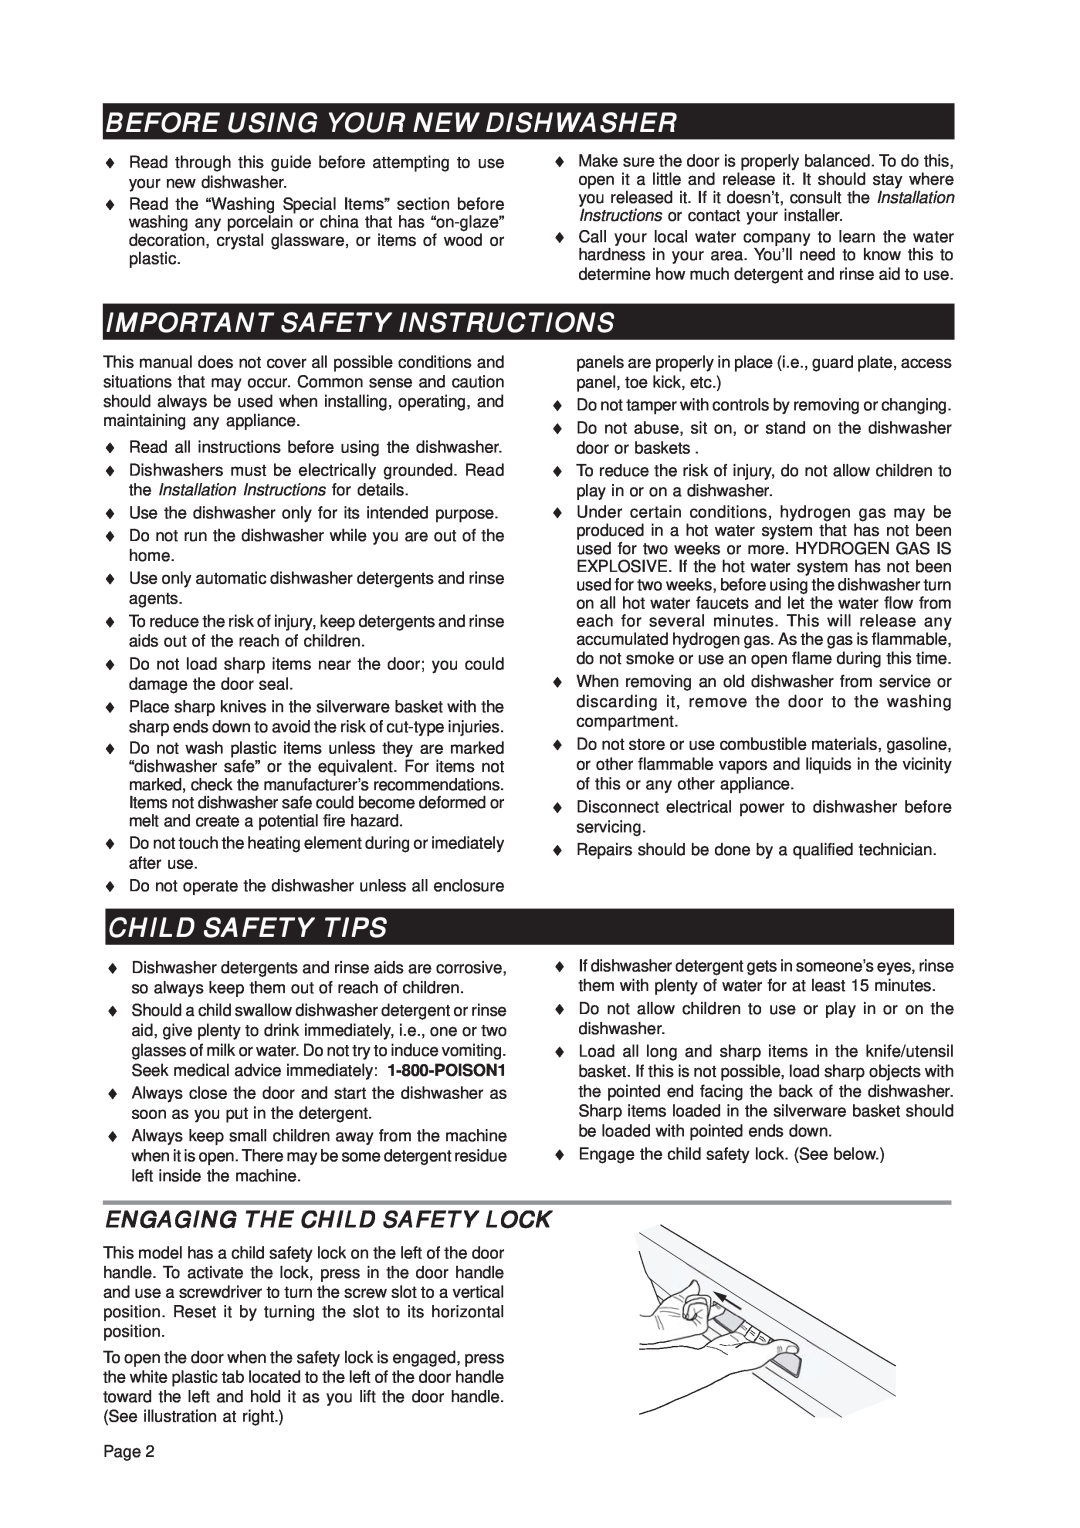 Asko D3112 important safety instructions Before Using Your New Dishwasher, Important Safety Instructions, Child Safety Tips 